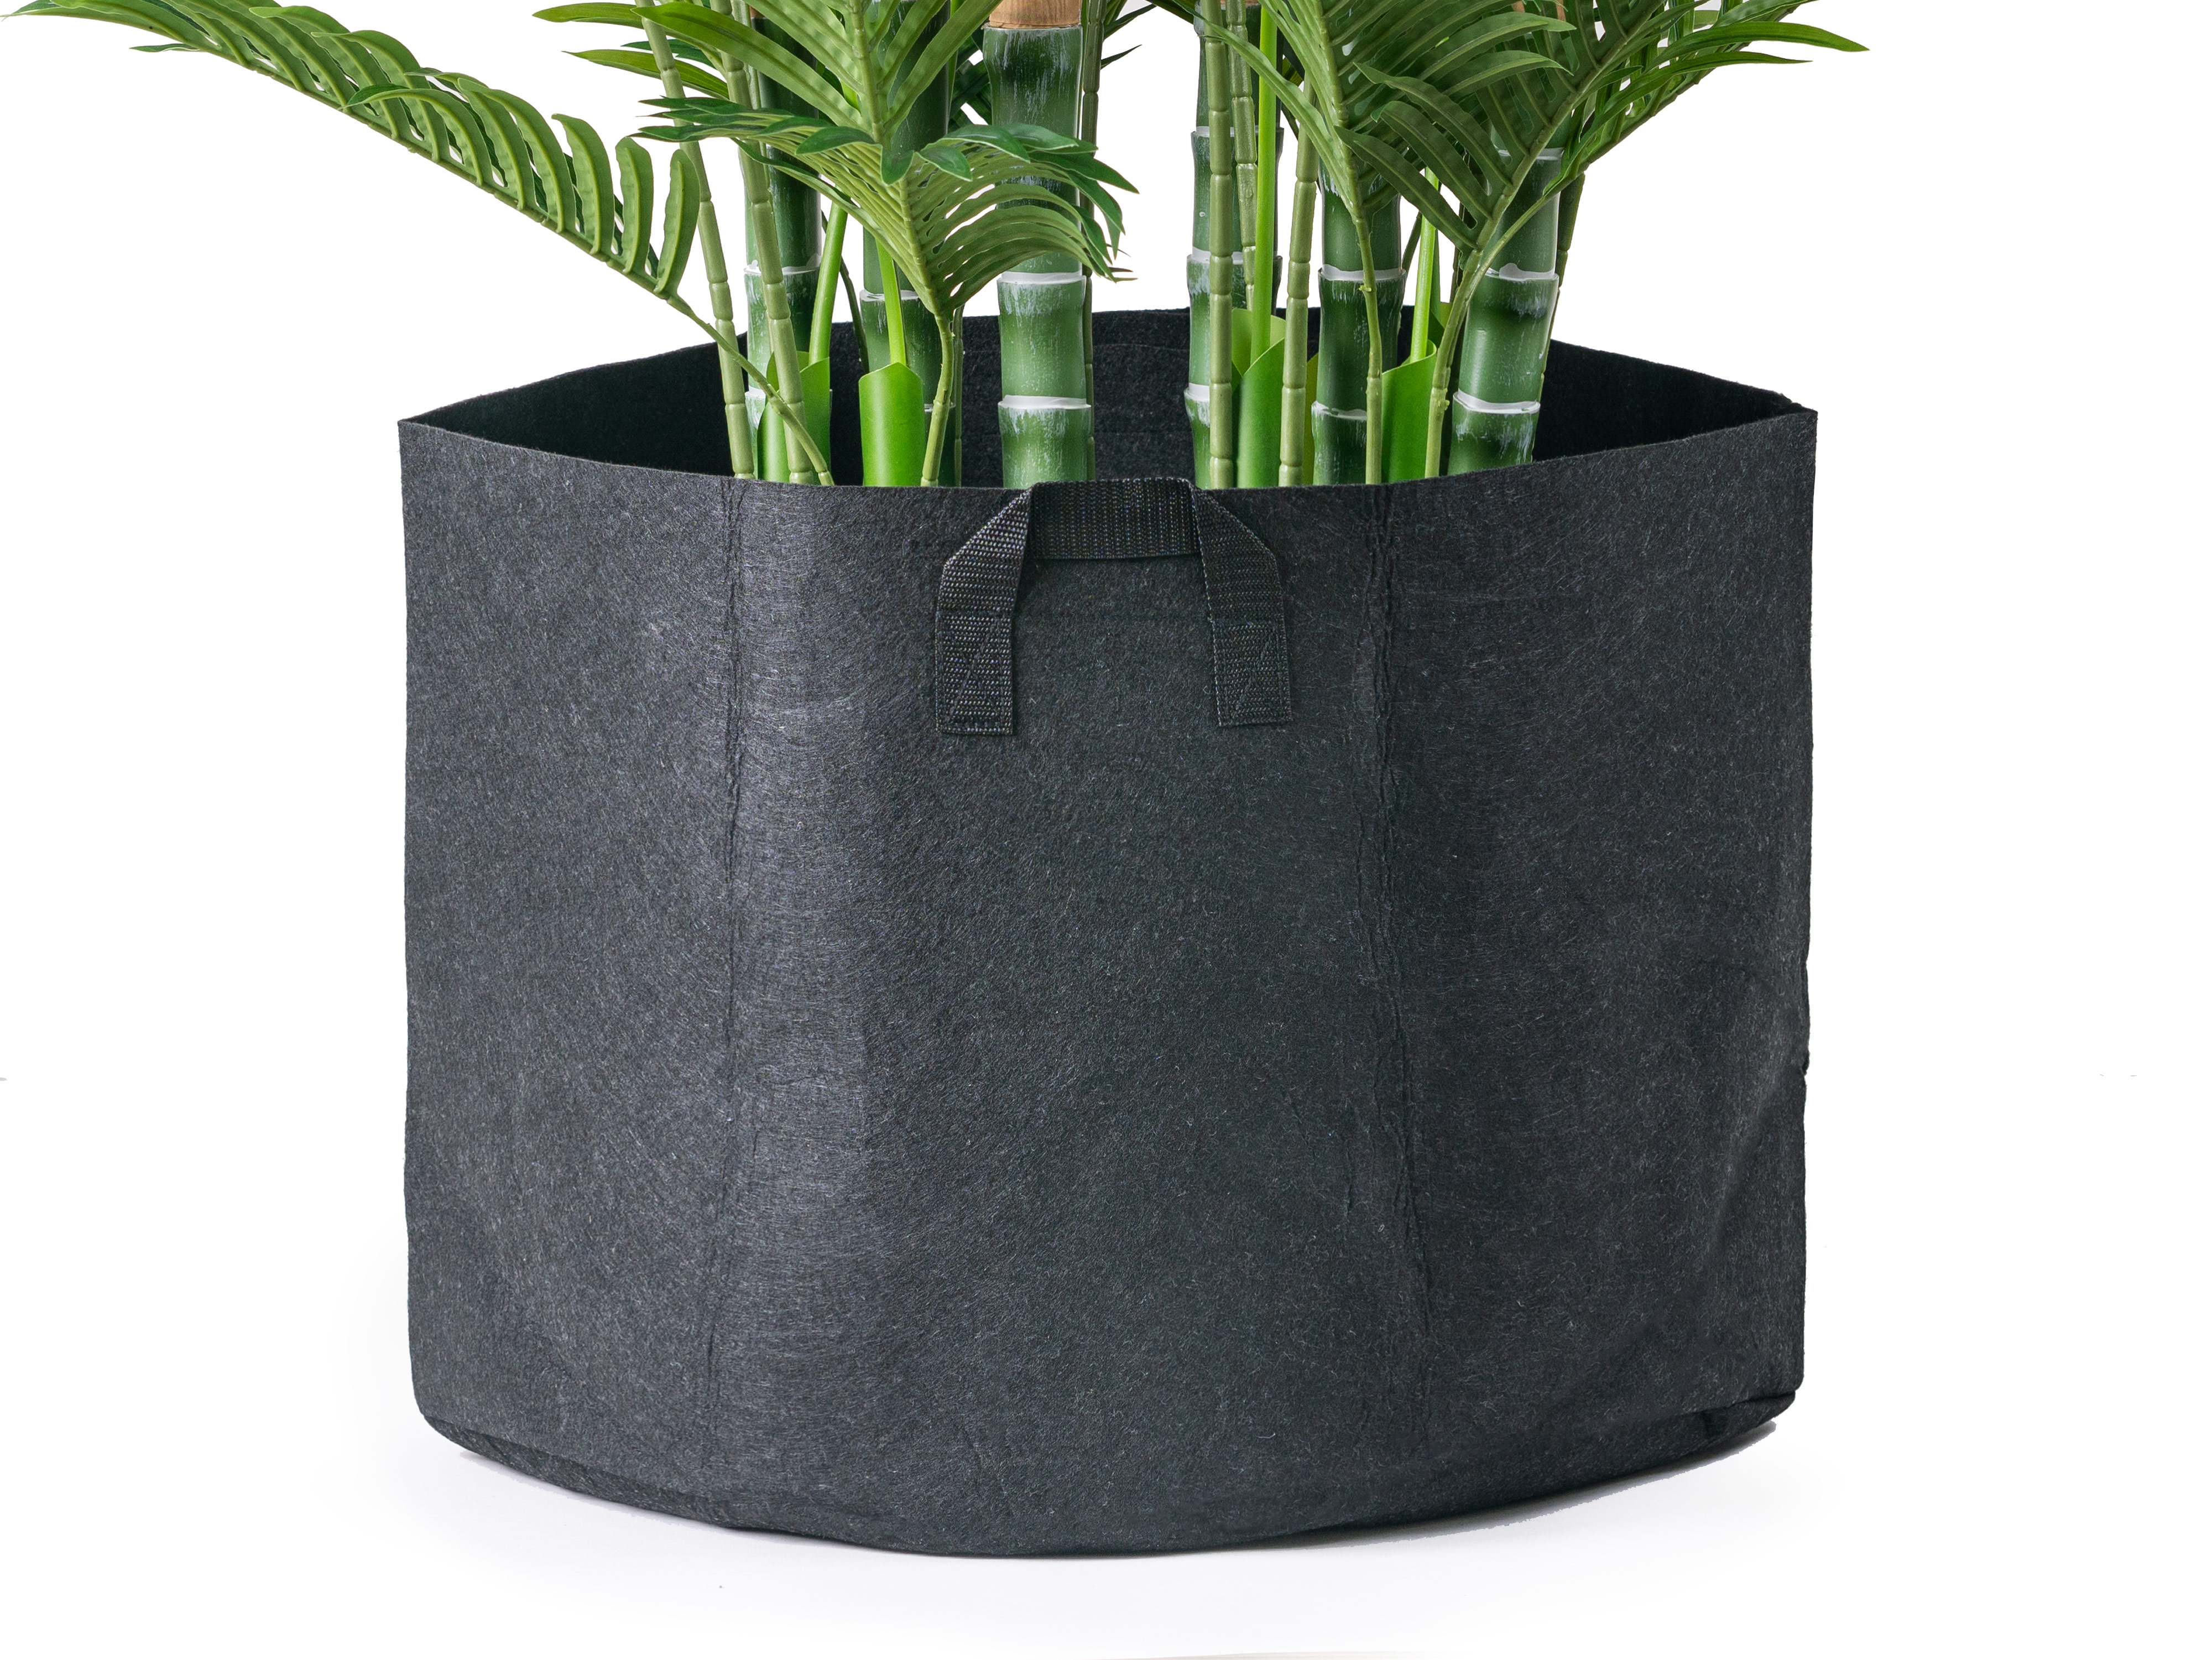 7 Benefits of HDPE Grow Bags for Urban and Small-Space Gardening